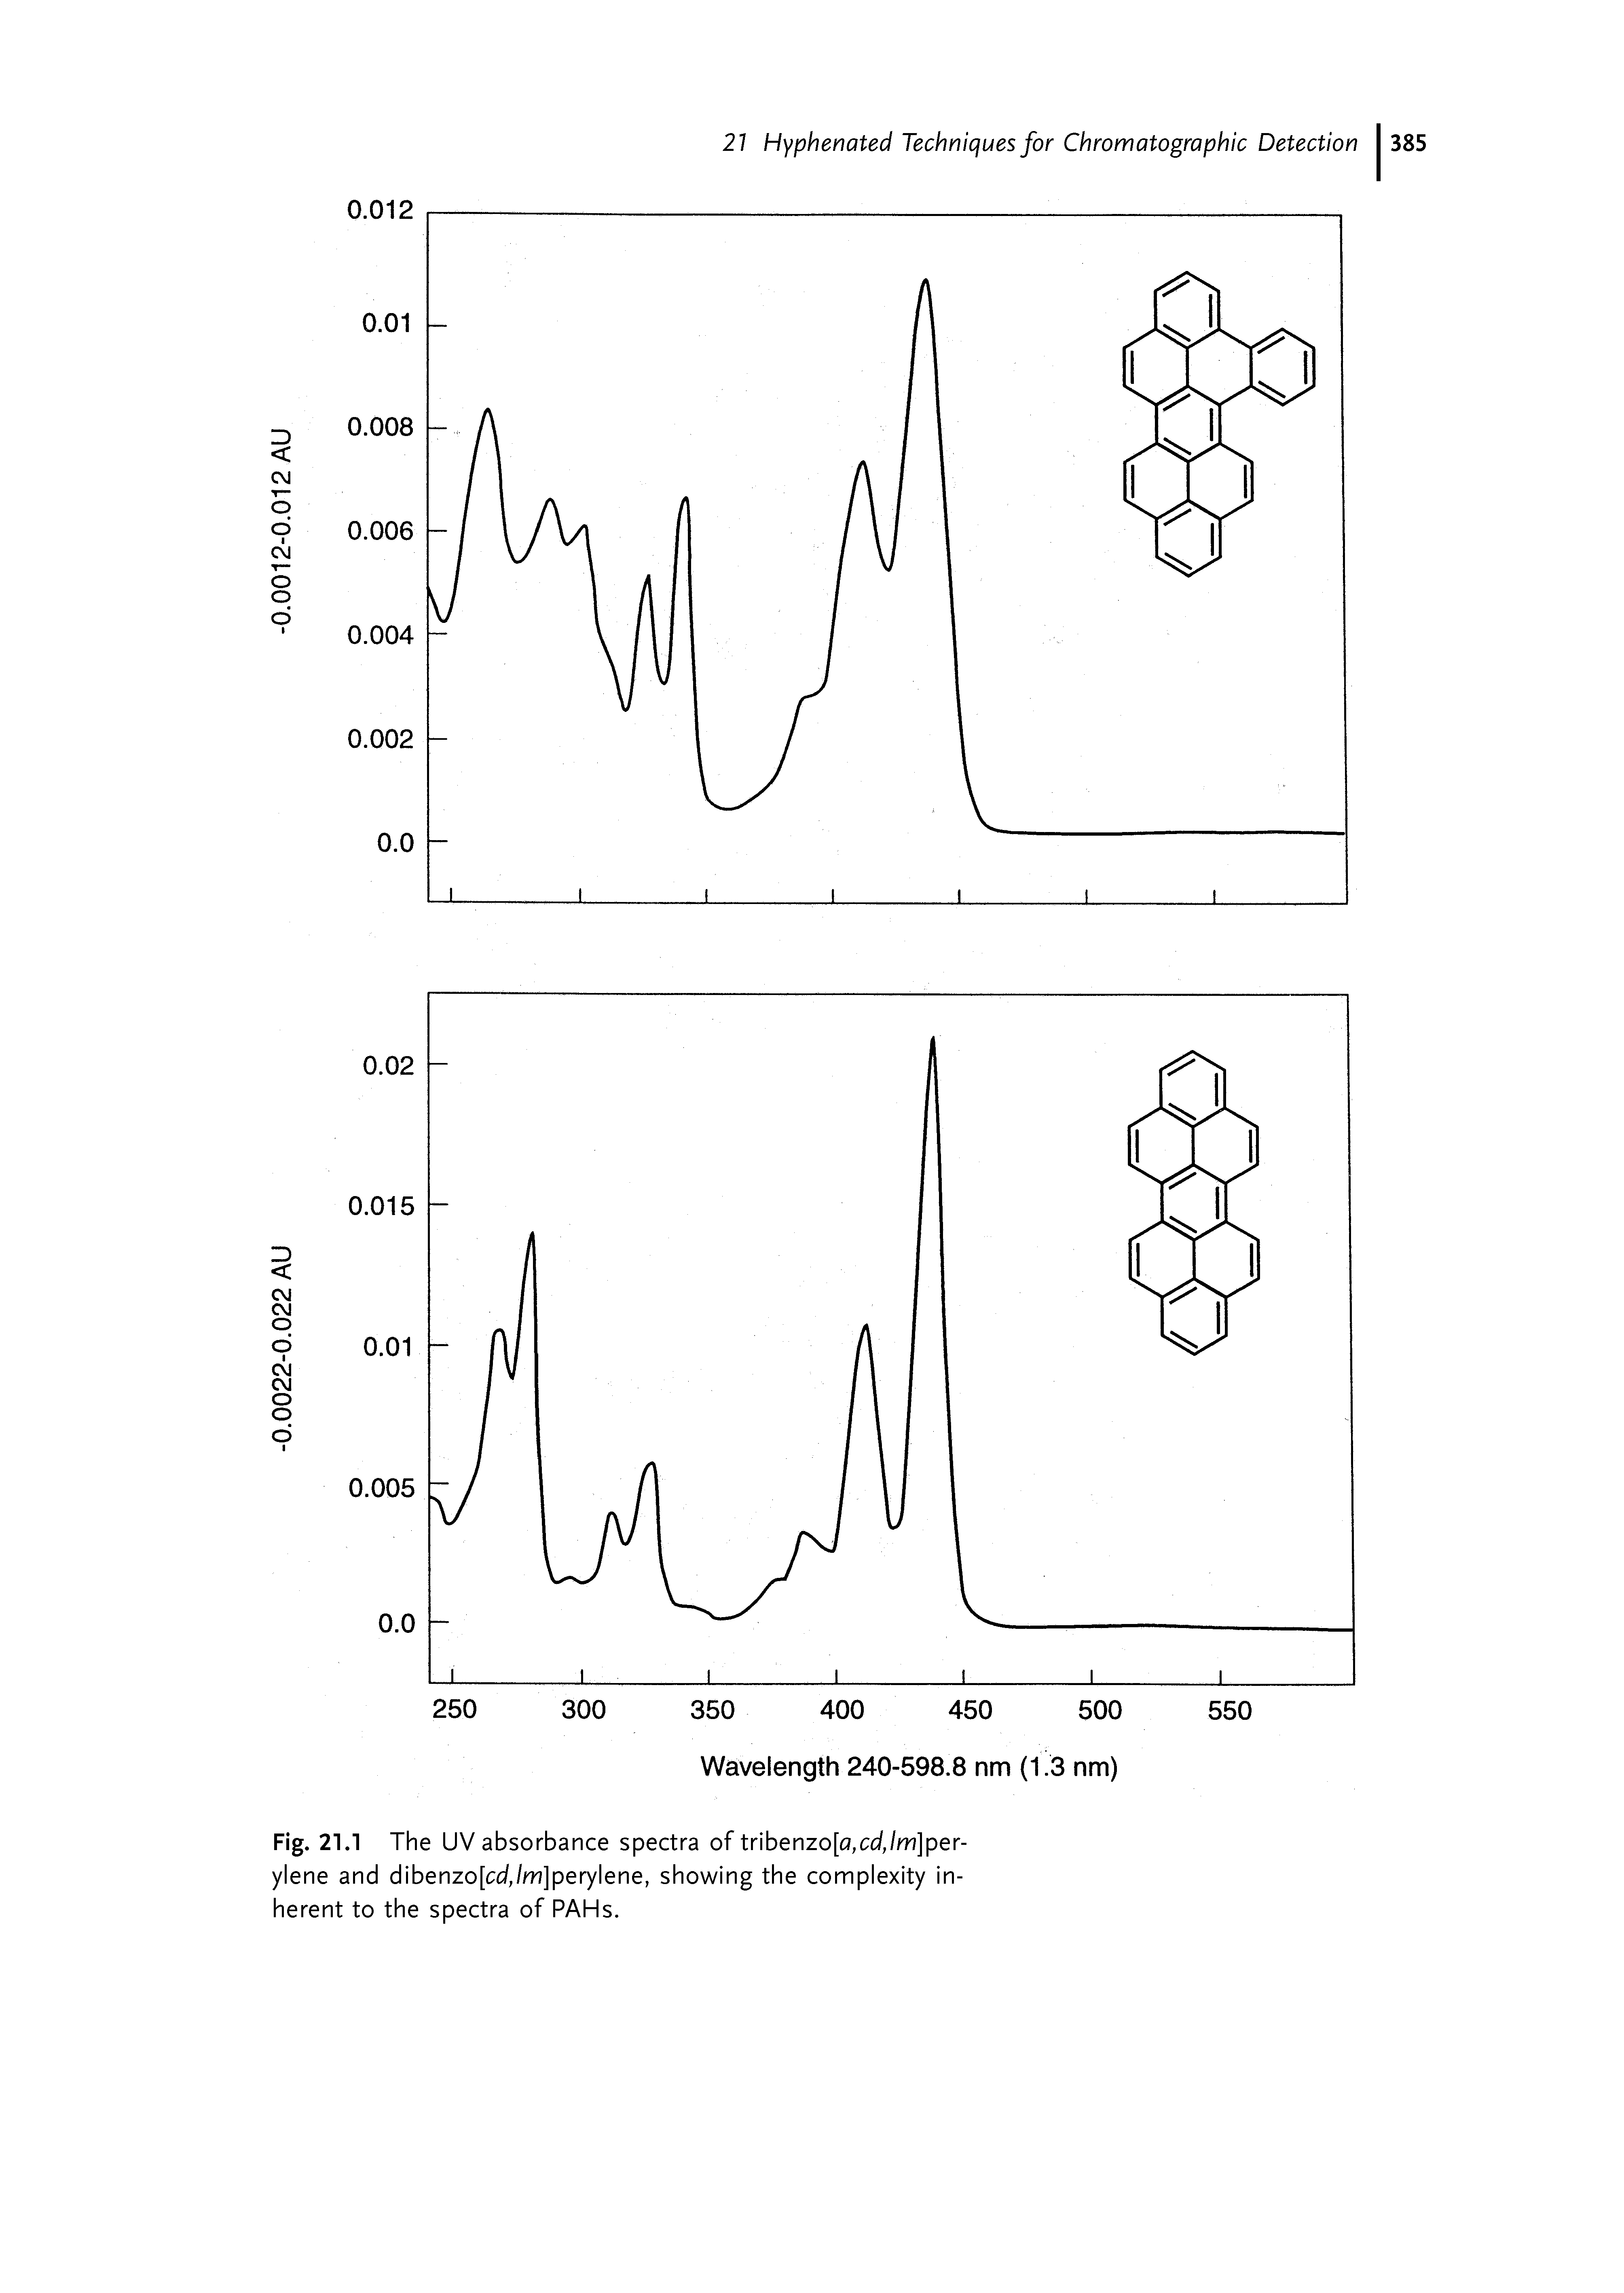 Fig. 21.1 The UV absorbance spectra of tribenzo[fl,ccf,/m]per-ylene and dibenzo[ccf,/m]perylene, showing the complexity inherent to the spectra of PAHs.